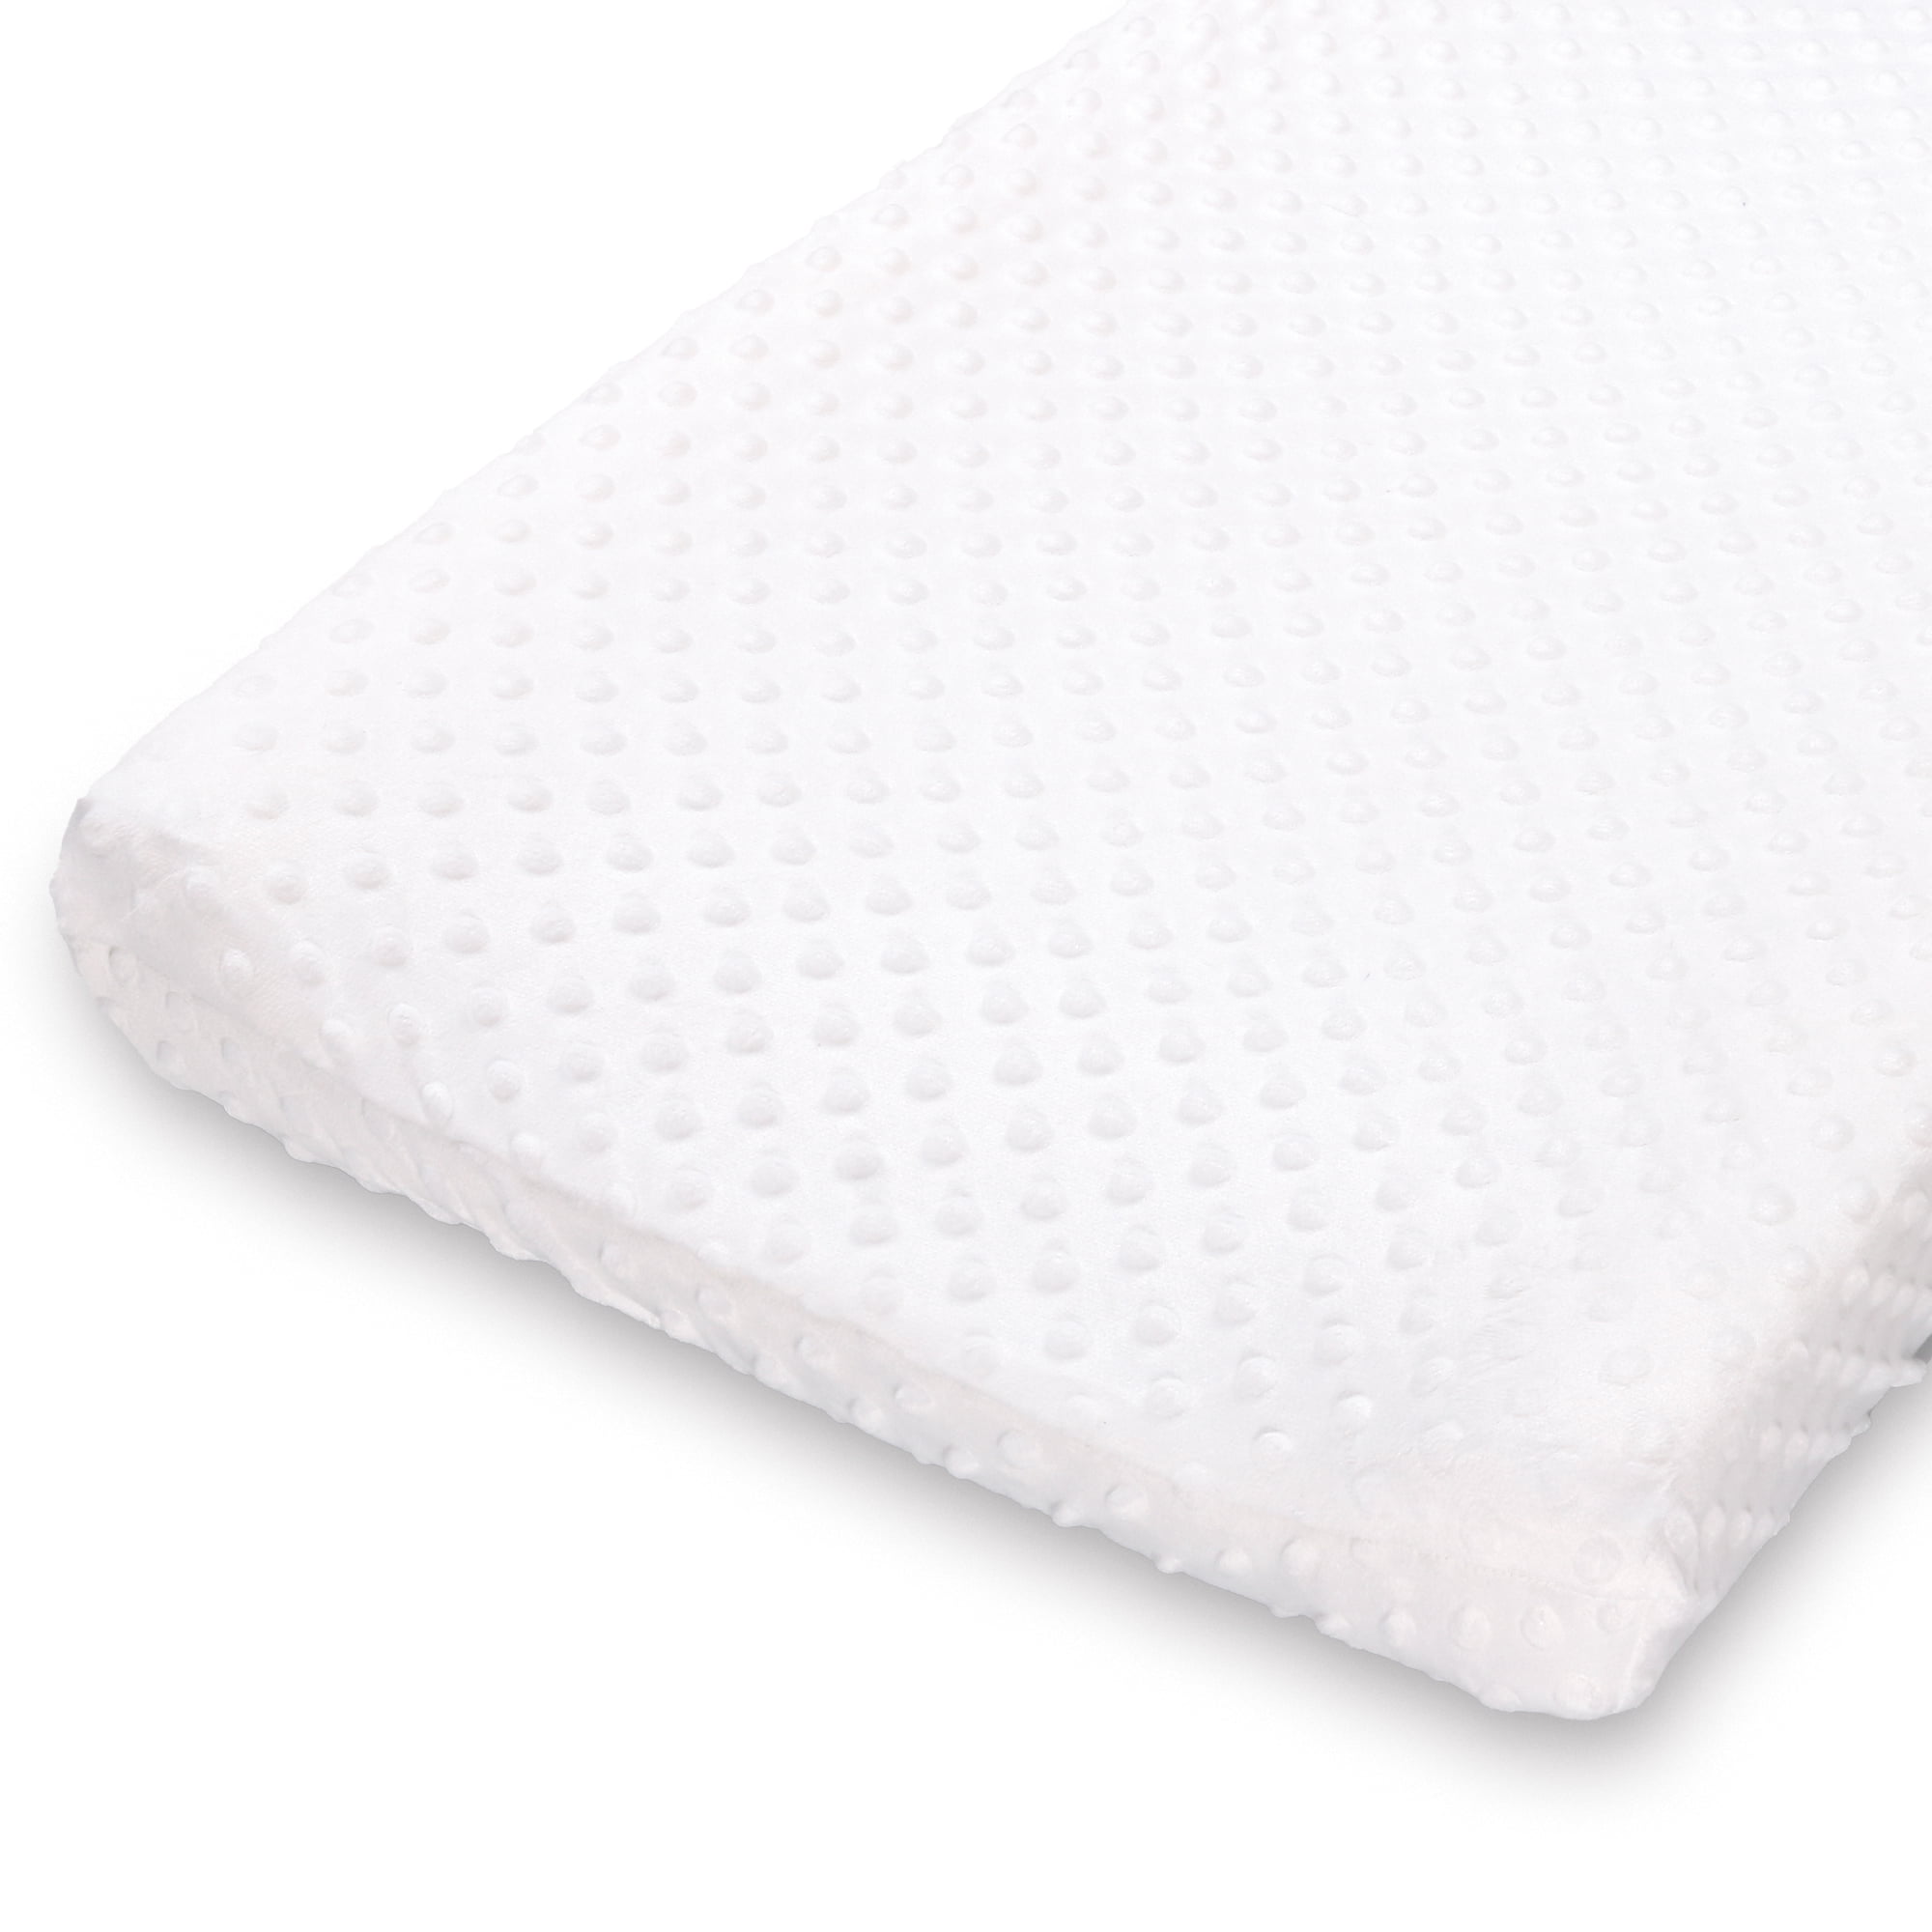 Mosaic Changing Pad Cover Contemporary Elephant Minky Dot by The Peanut Shell 